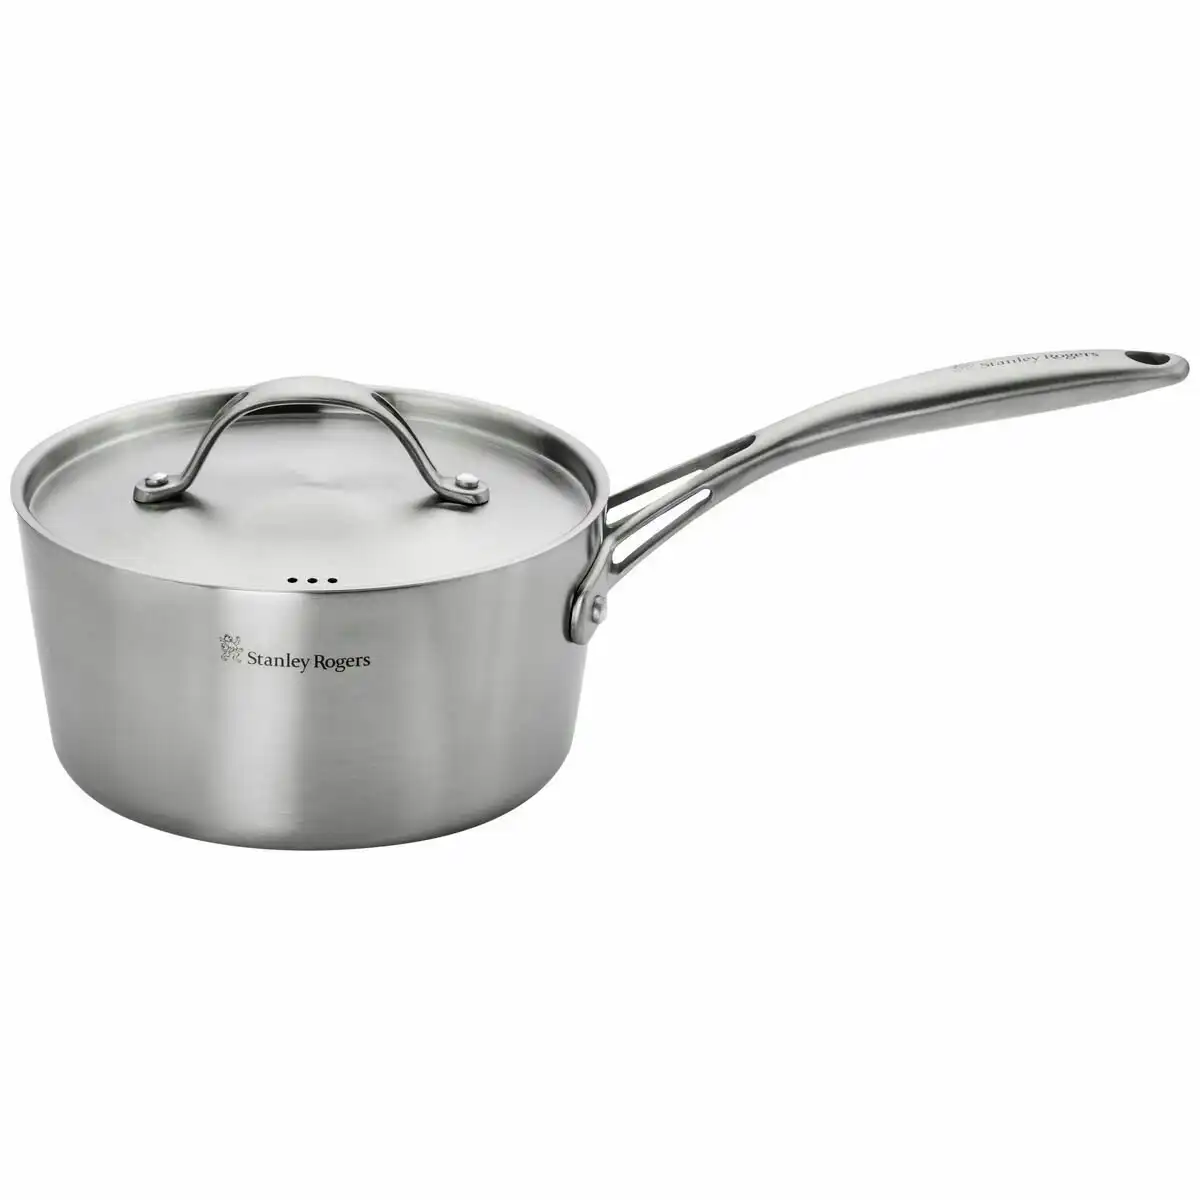 Stanley Rogers 18cm Conical TRI-PLY Saucepan